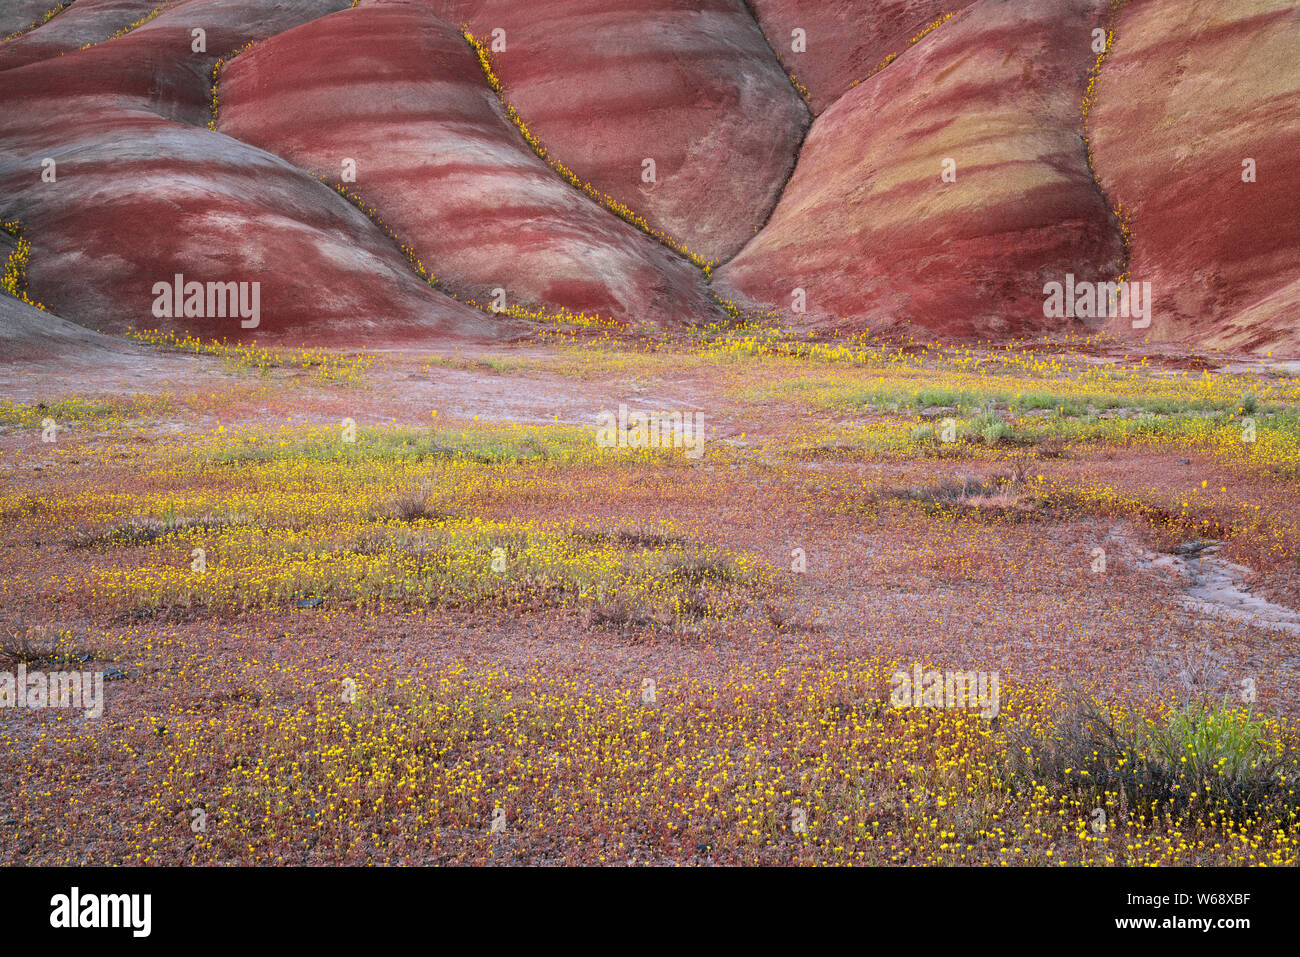 The civil twilight glow on the spring bloom of wildflowers at the base of the Painted Hills Unit in central Oregon’s John Day Fossil Beds. Stock Photo